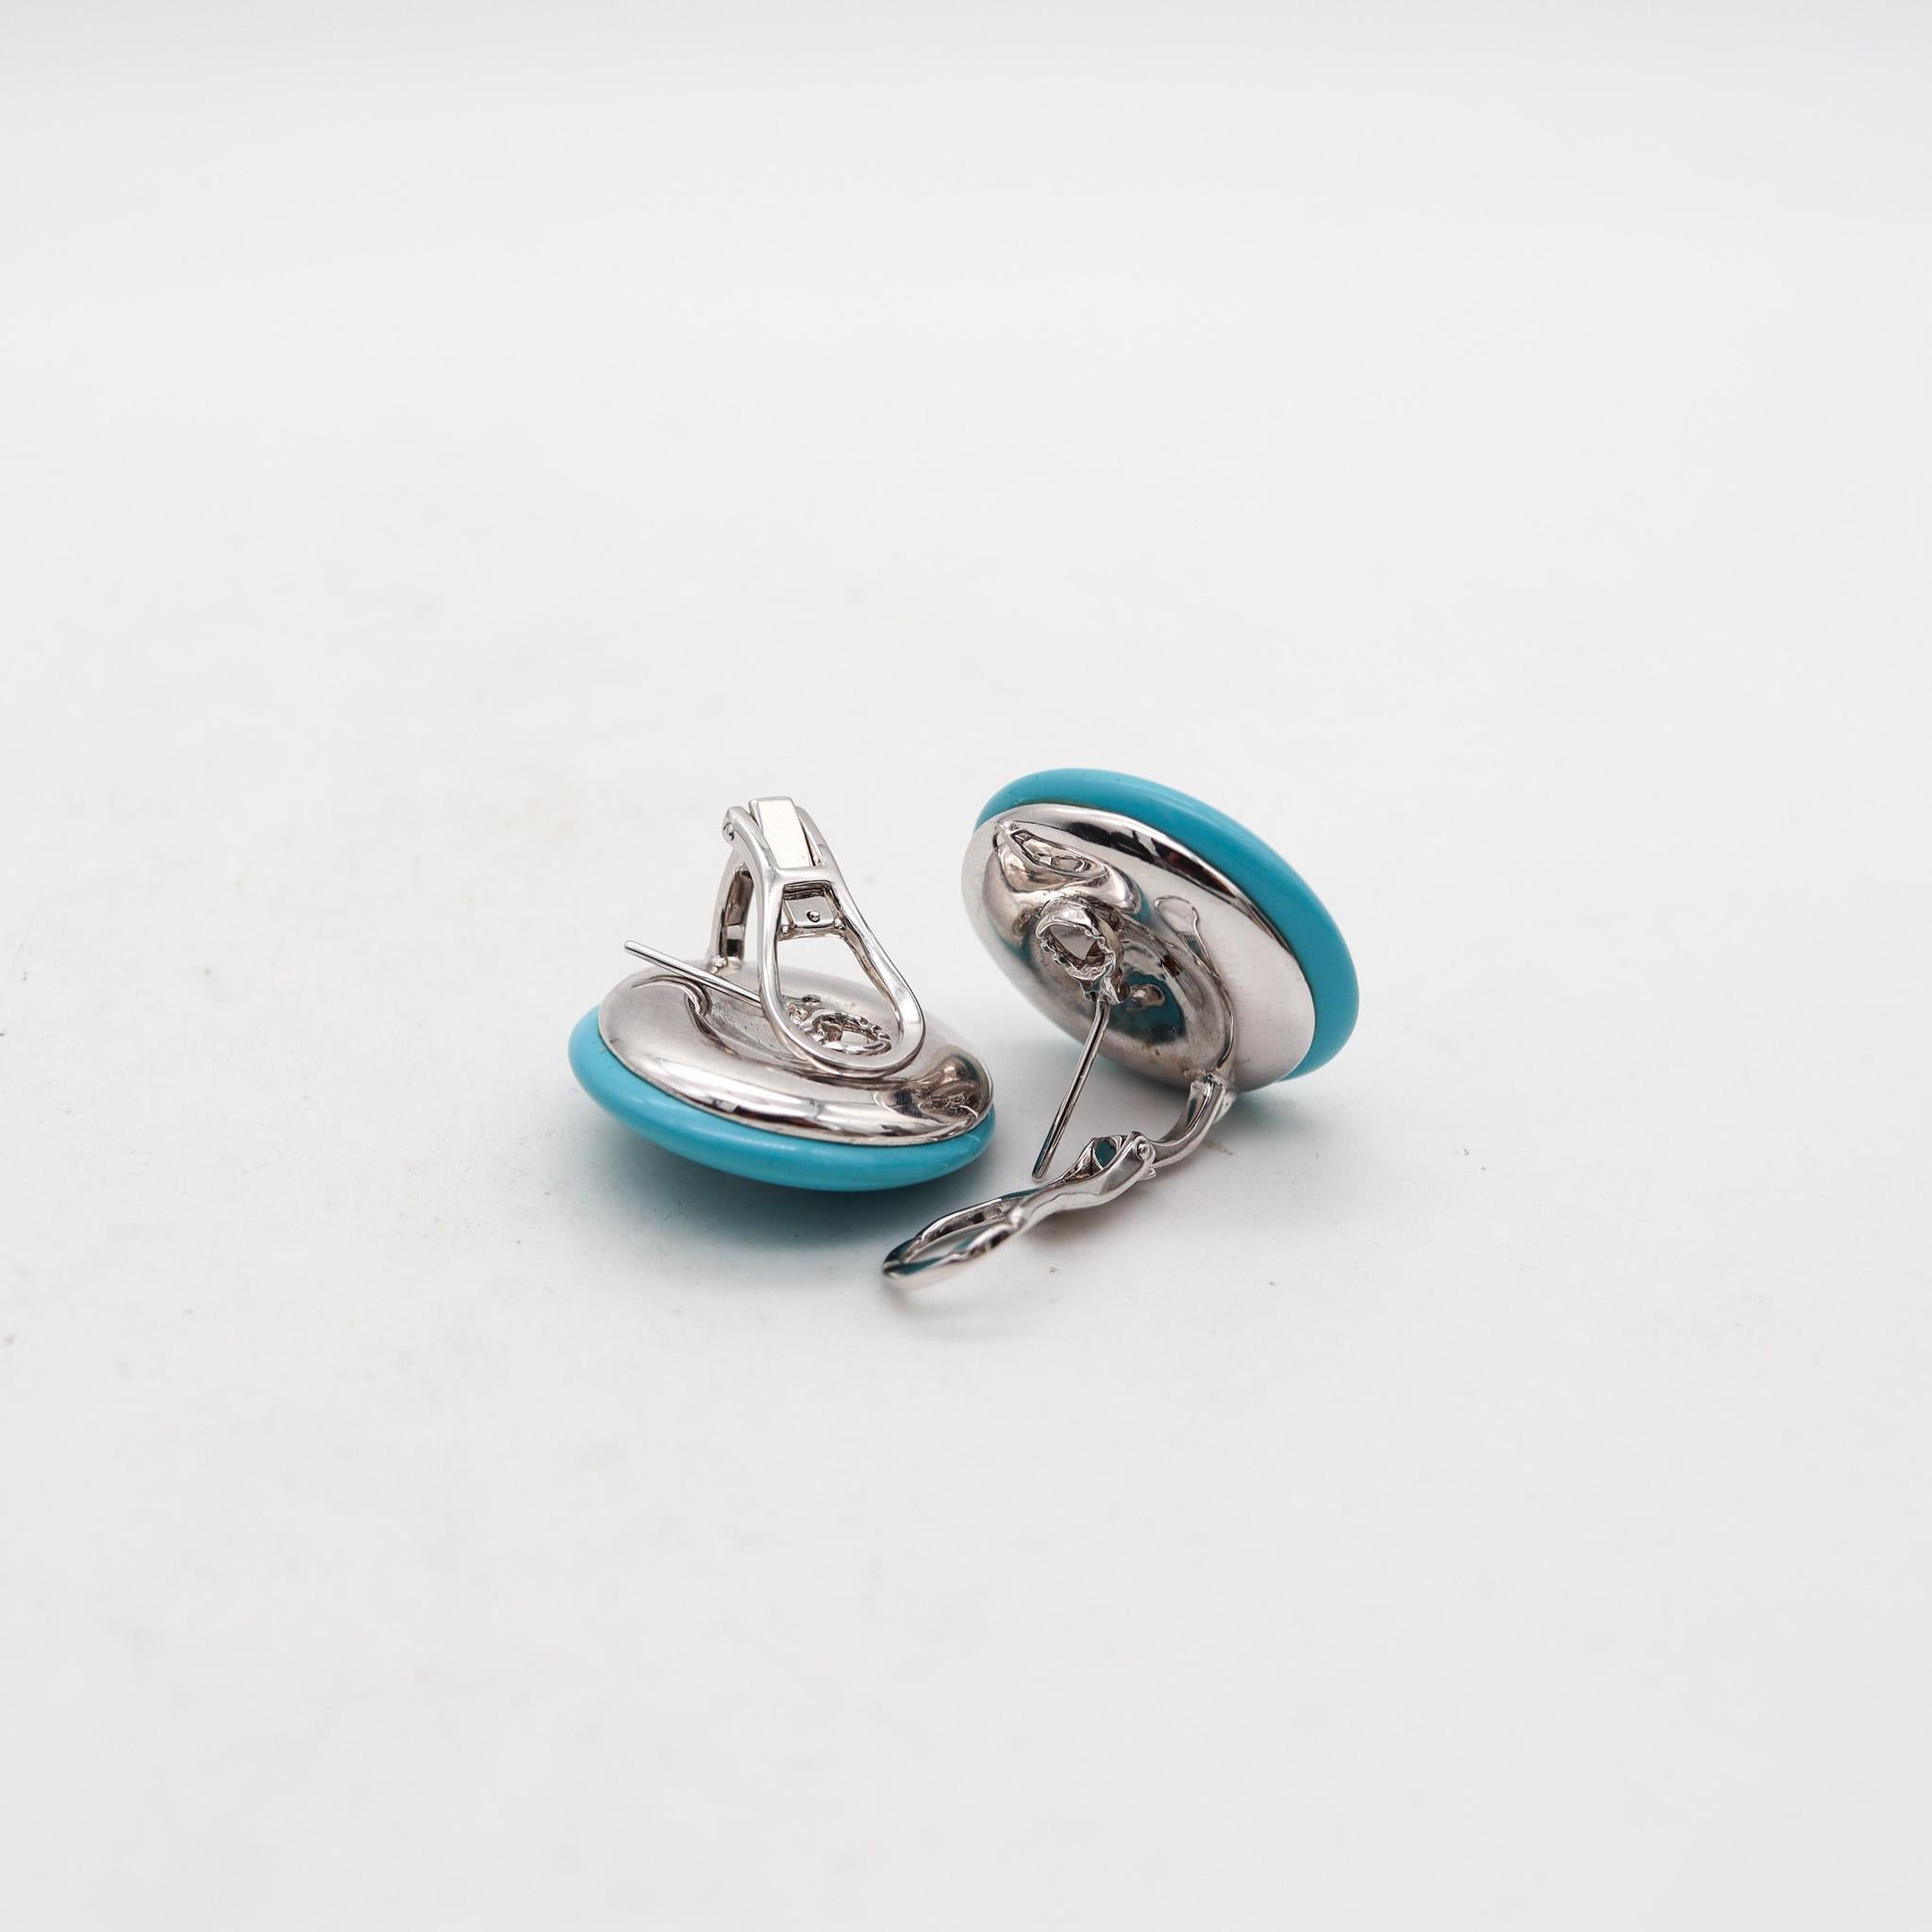 Modernist Round Carved Turquoise Earrings In 18Kt White Gold With VS Diamonds In Excellent Condition For Sale In Miami, FL